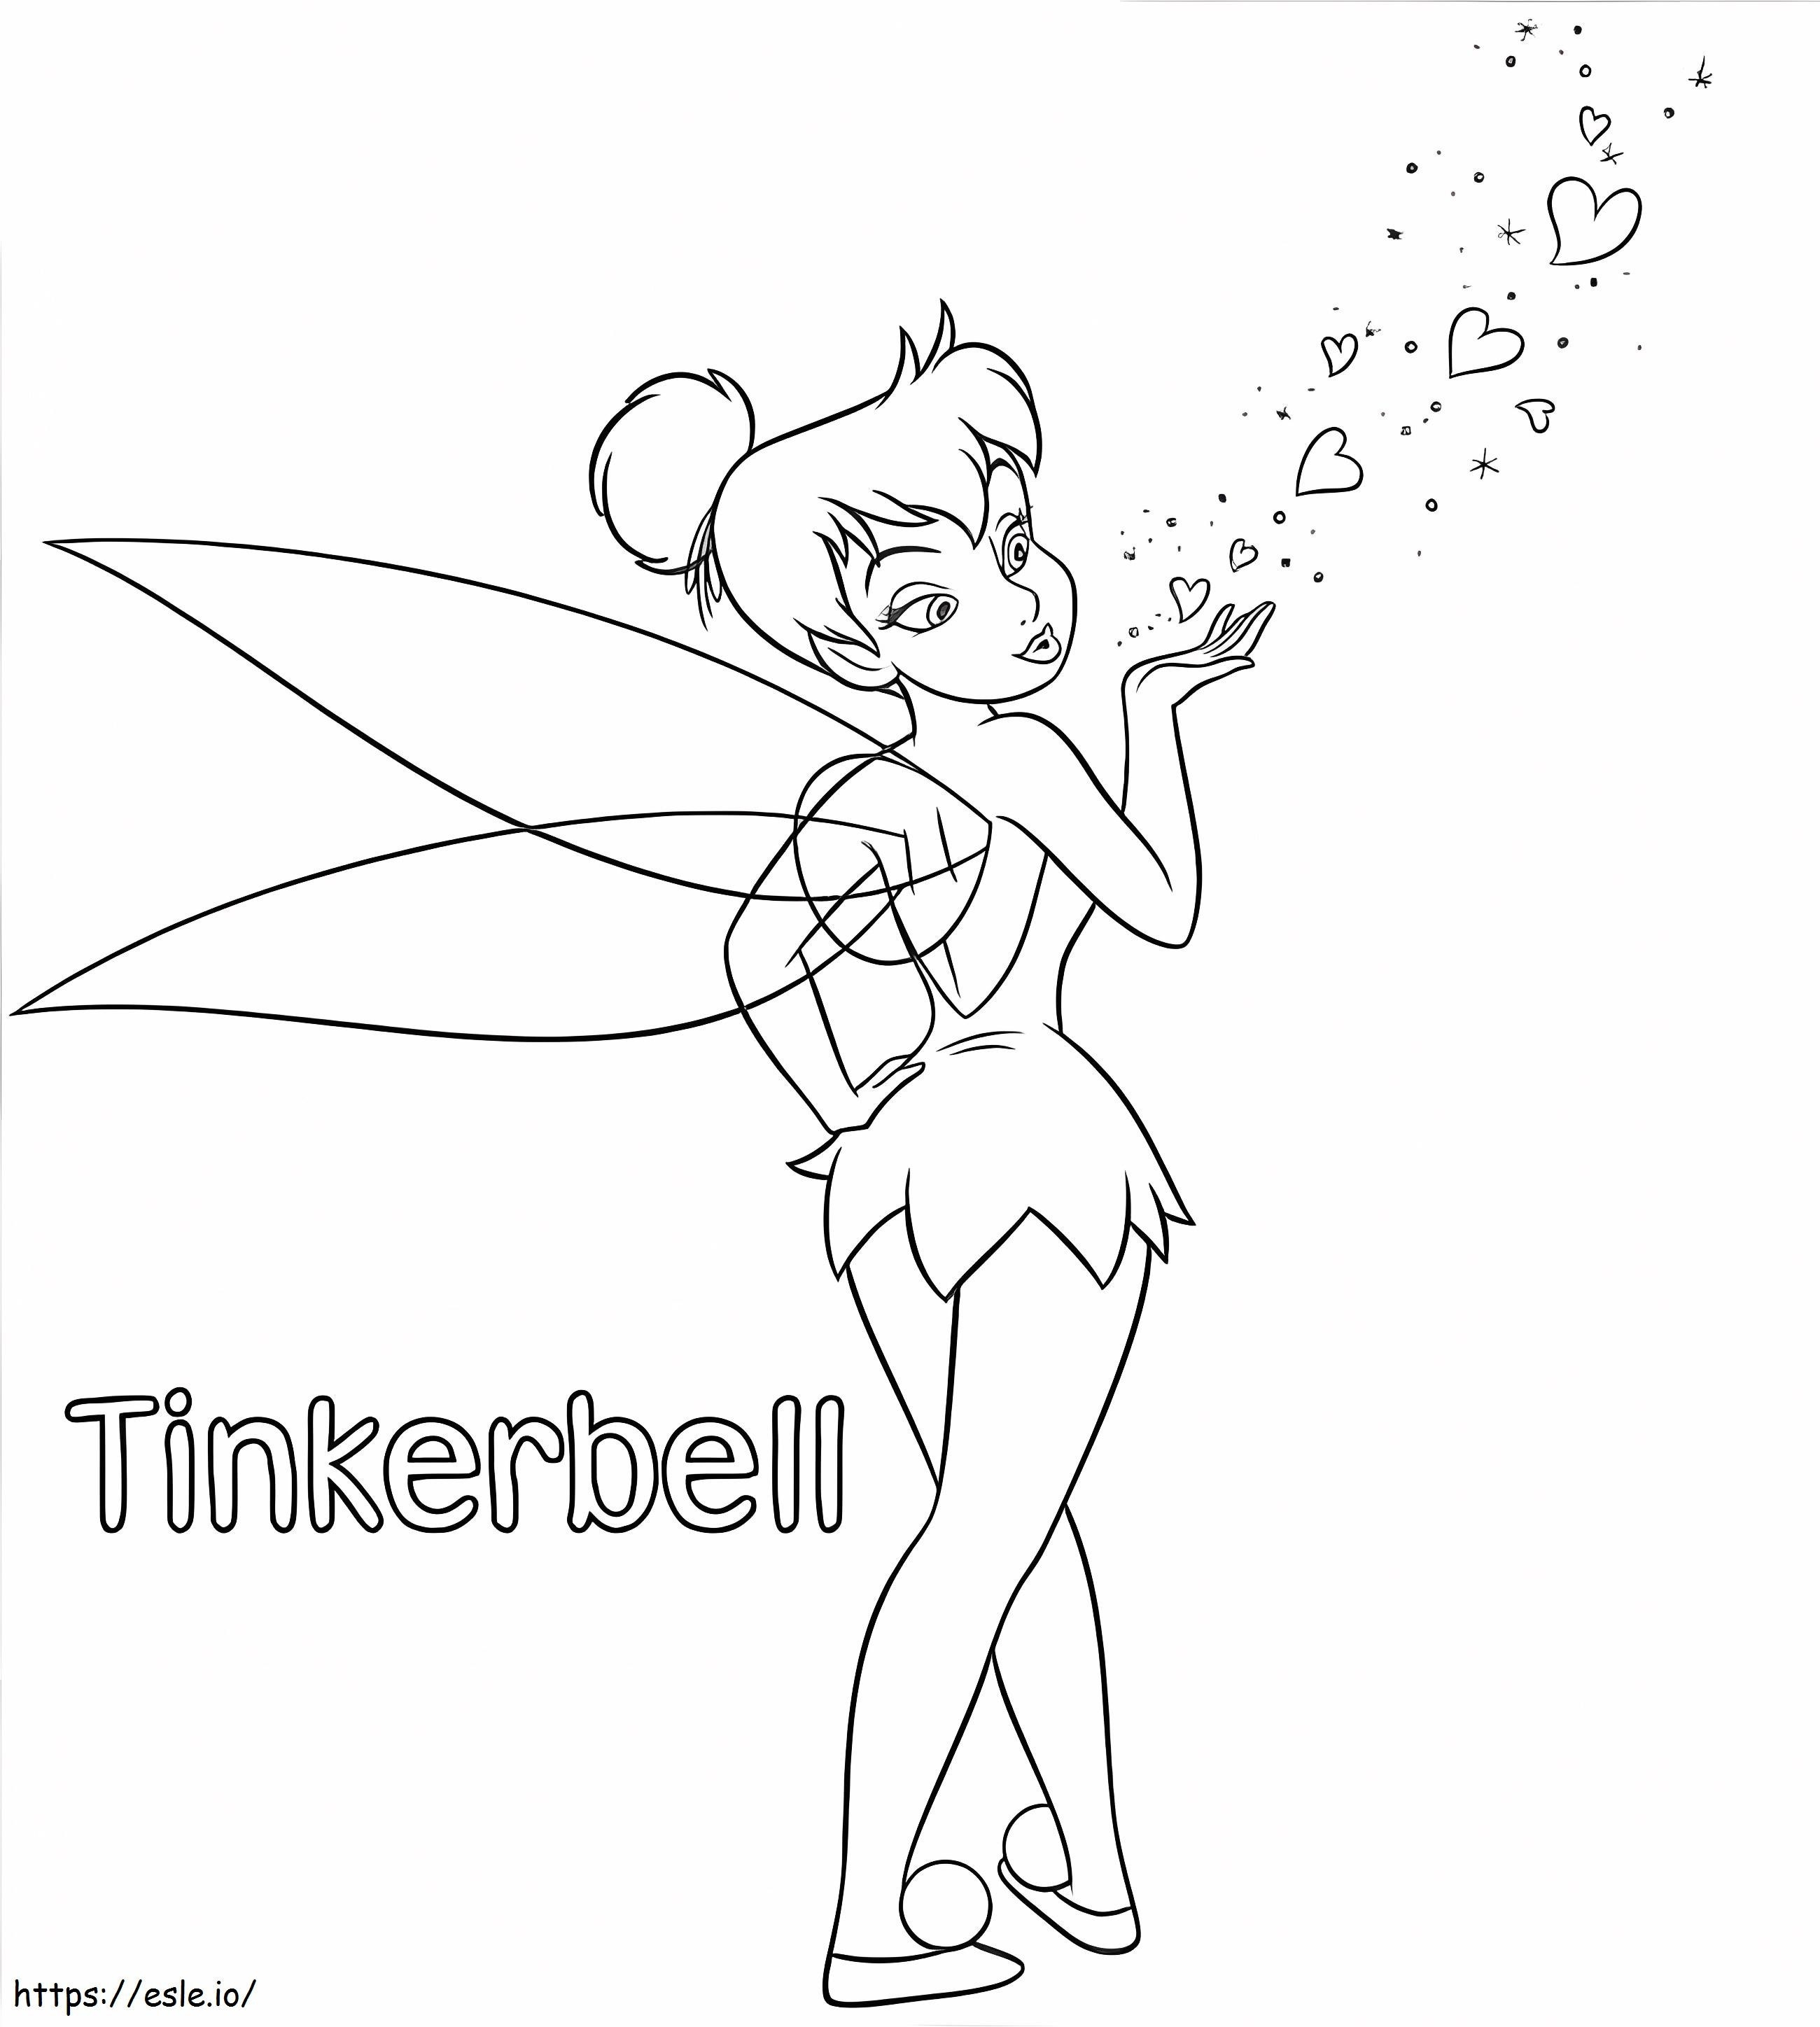 Good Tinkerbell coloring page